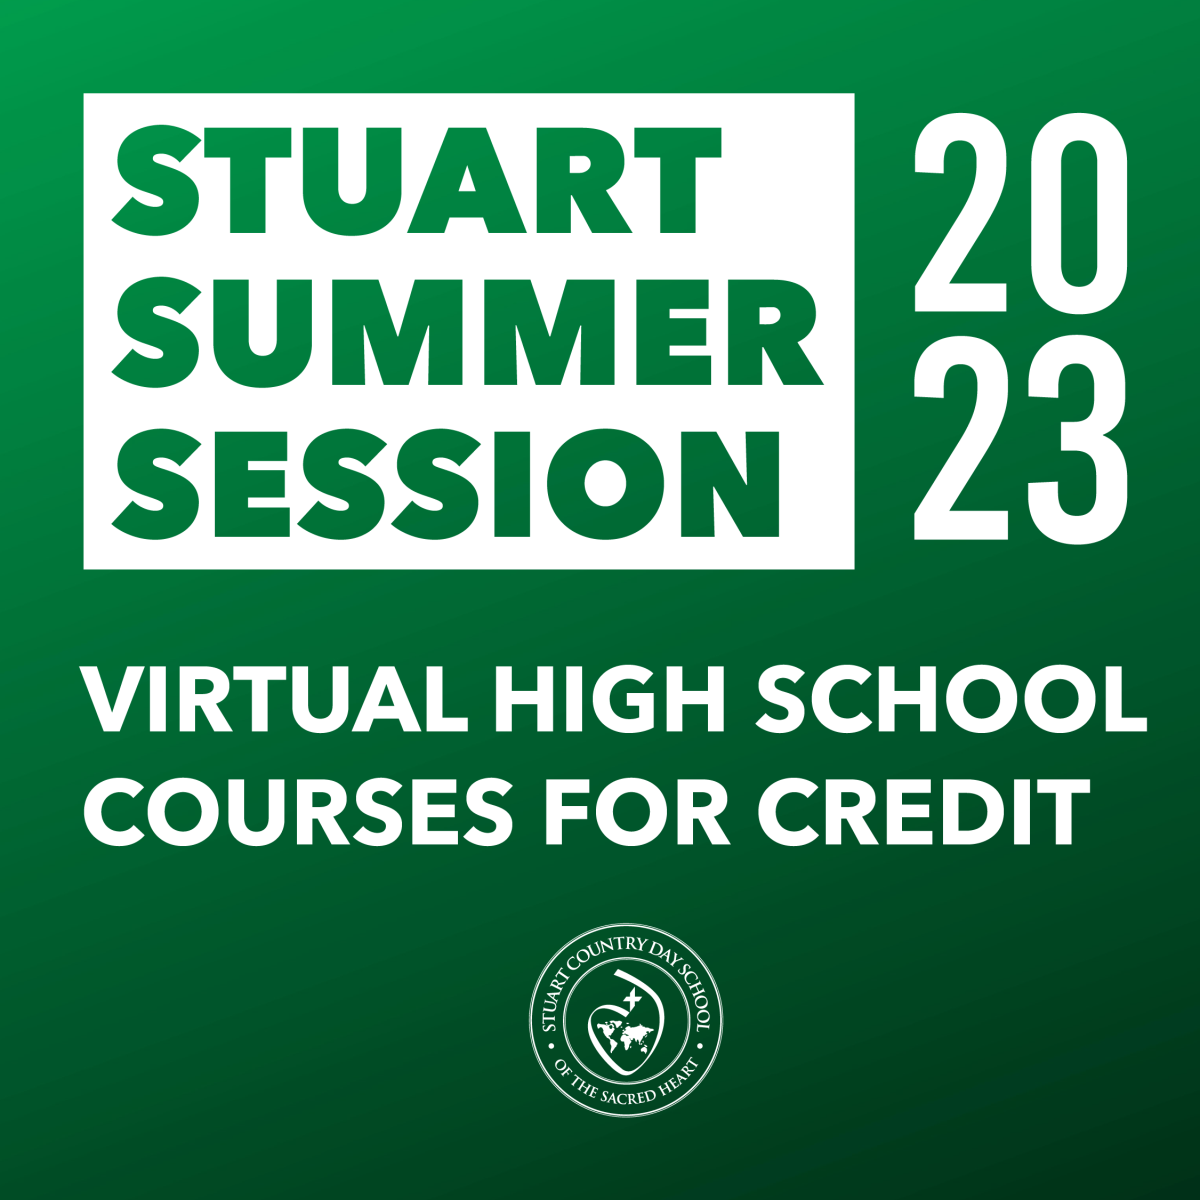 Registration is open for summer virtual math courses for high school